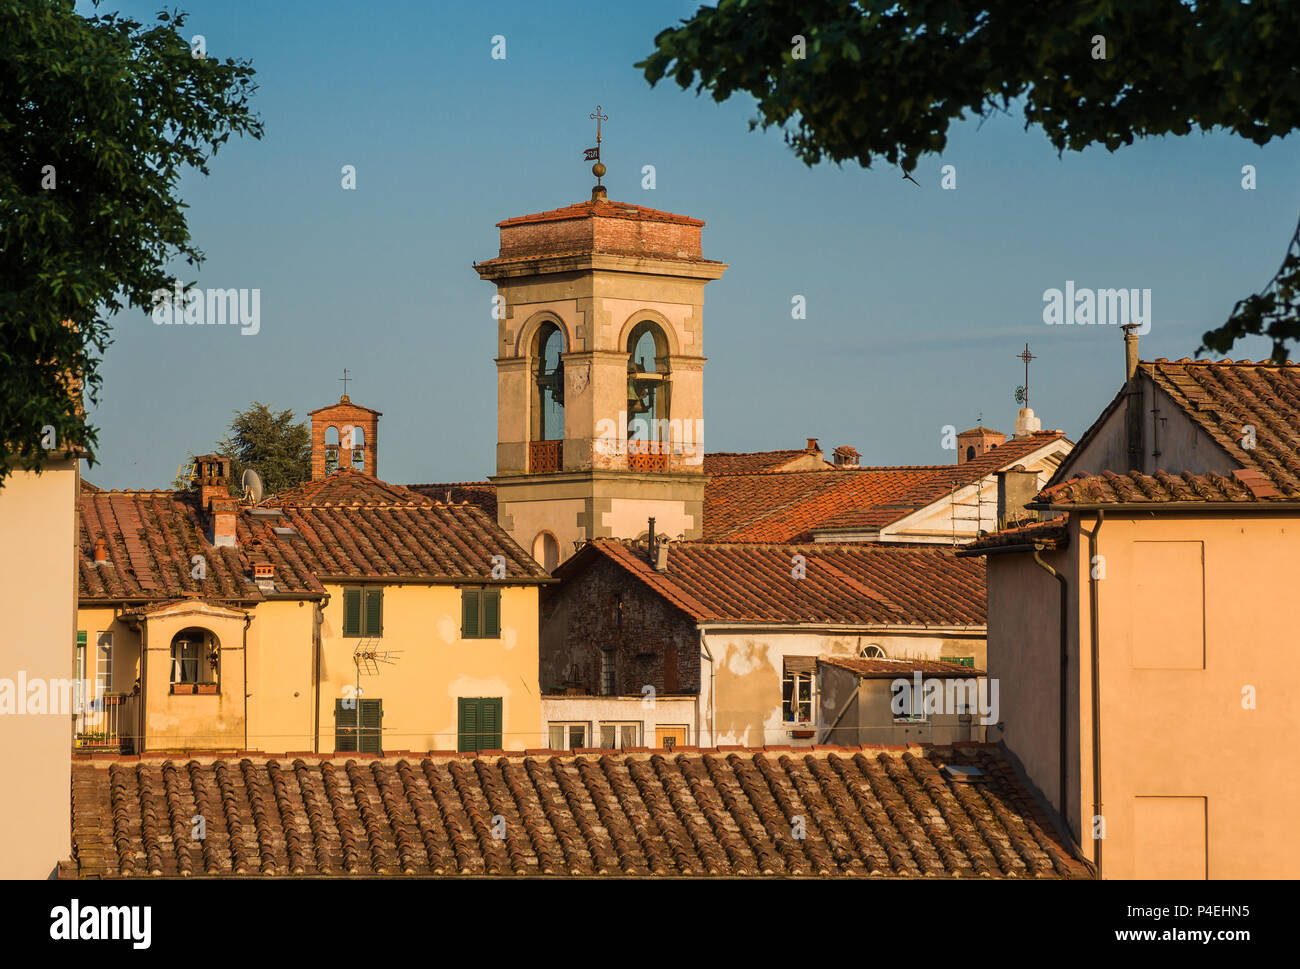 Lucca medieval historic center with ancient towers and churches Stock Photo